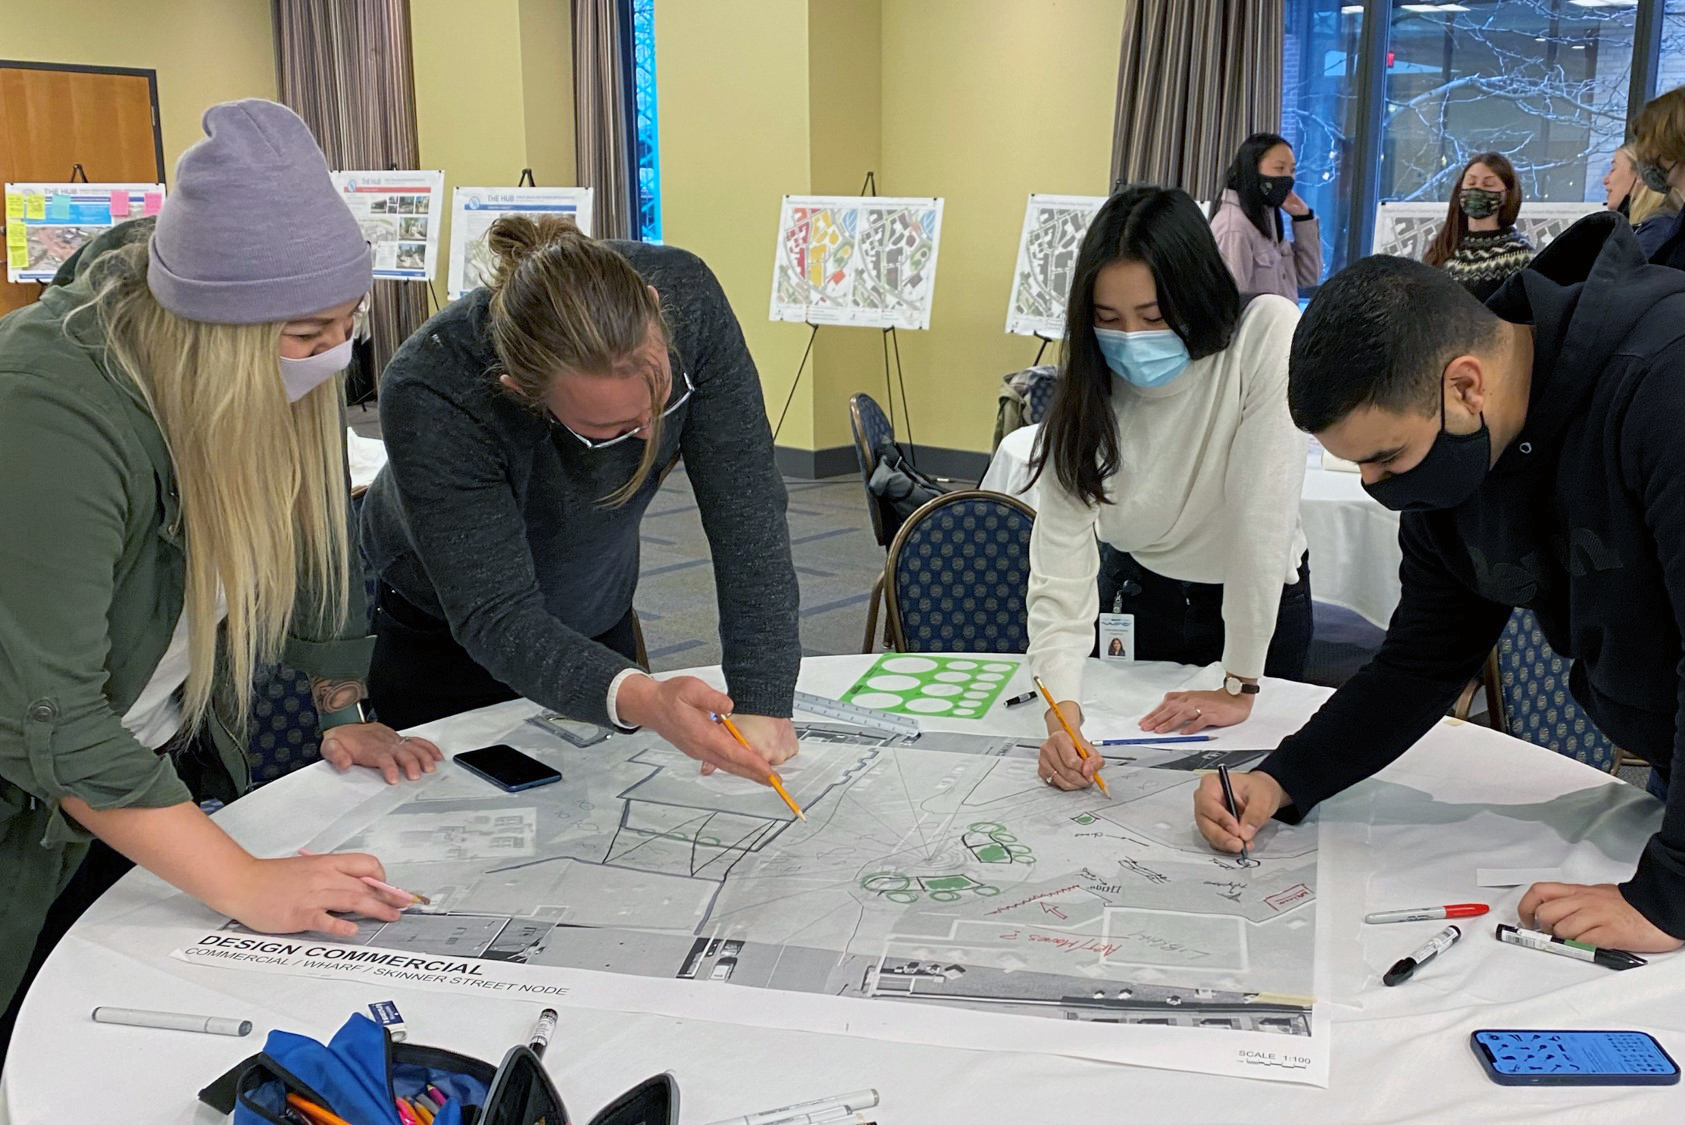 Nanaimo residents make notes on a map of the downtown area during the discovery charrette.